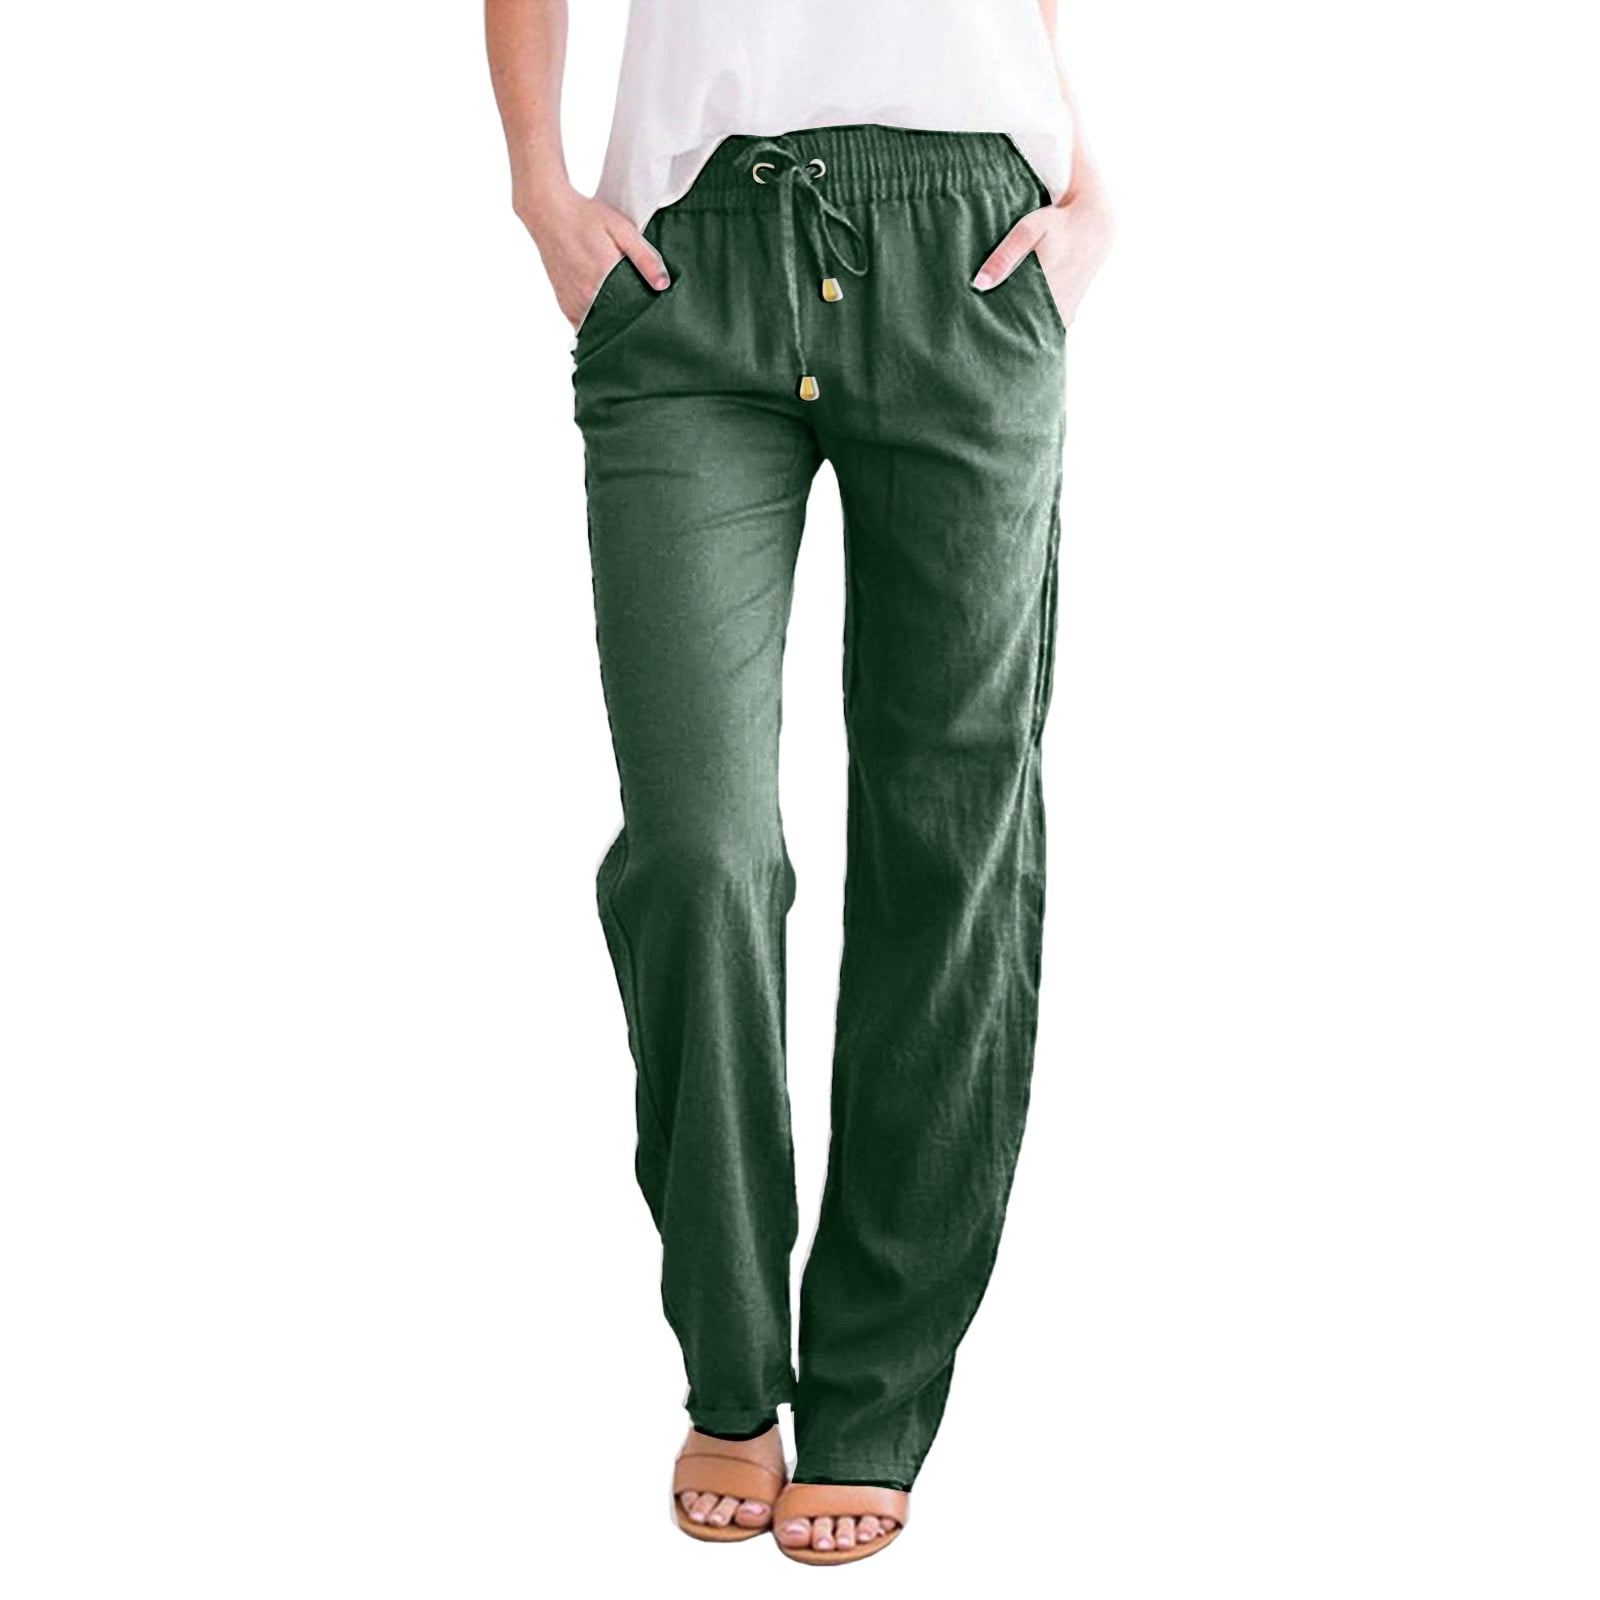 Women's Linen Casual Pants Solid And Pants With Pocket Long Pants 5x ...